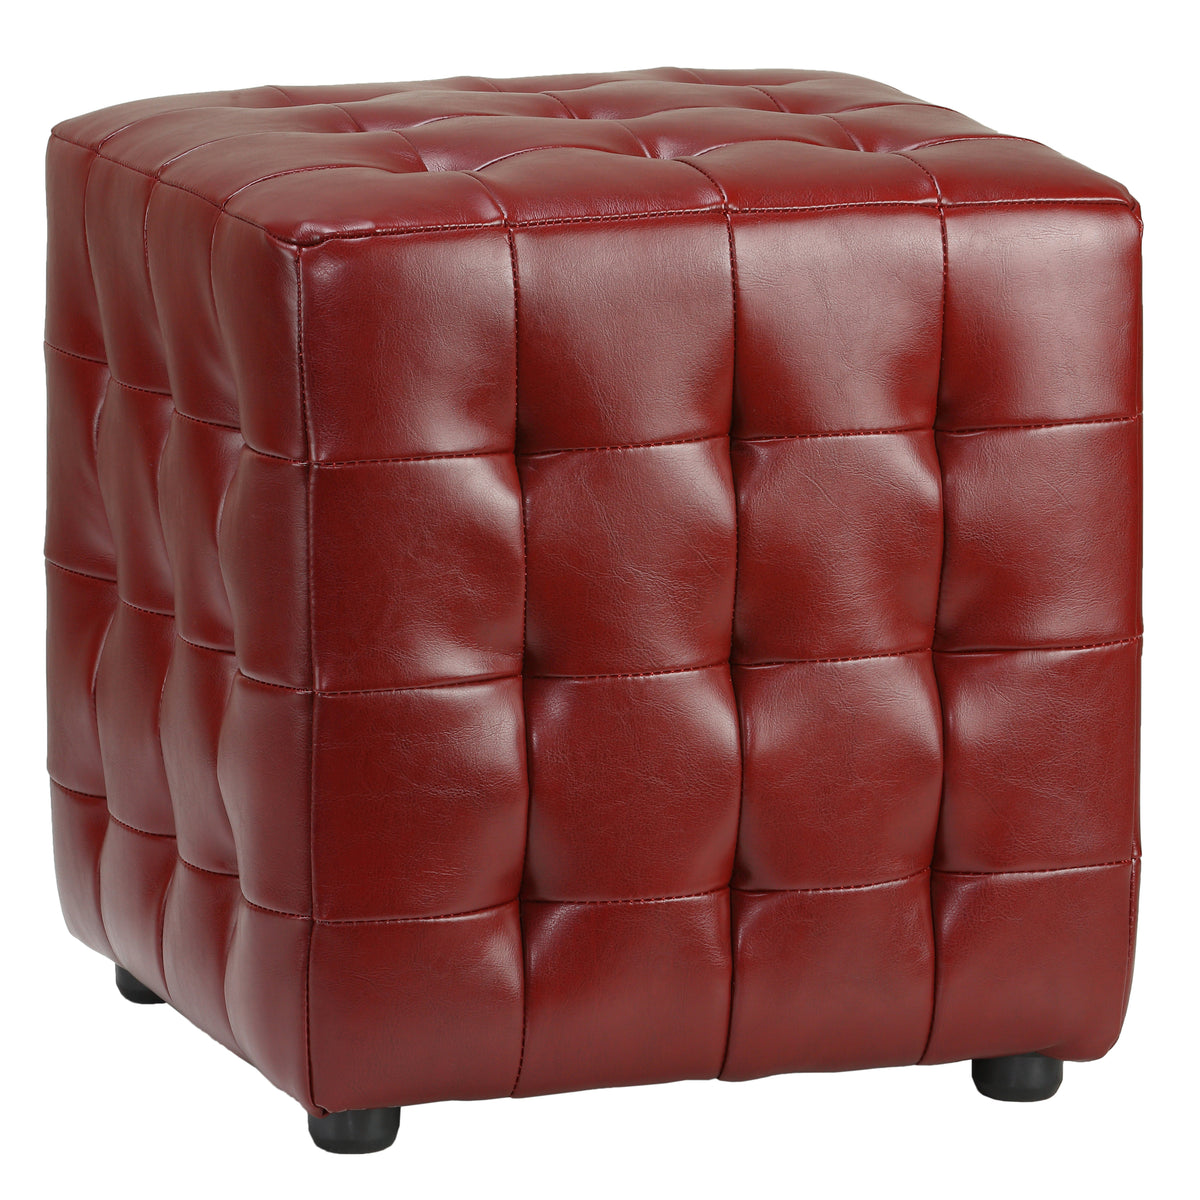 Cortesi Home Izzo Tufted Cube Ottoman in Cherry Red Bonded Leather